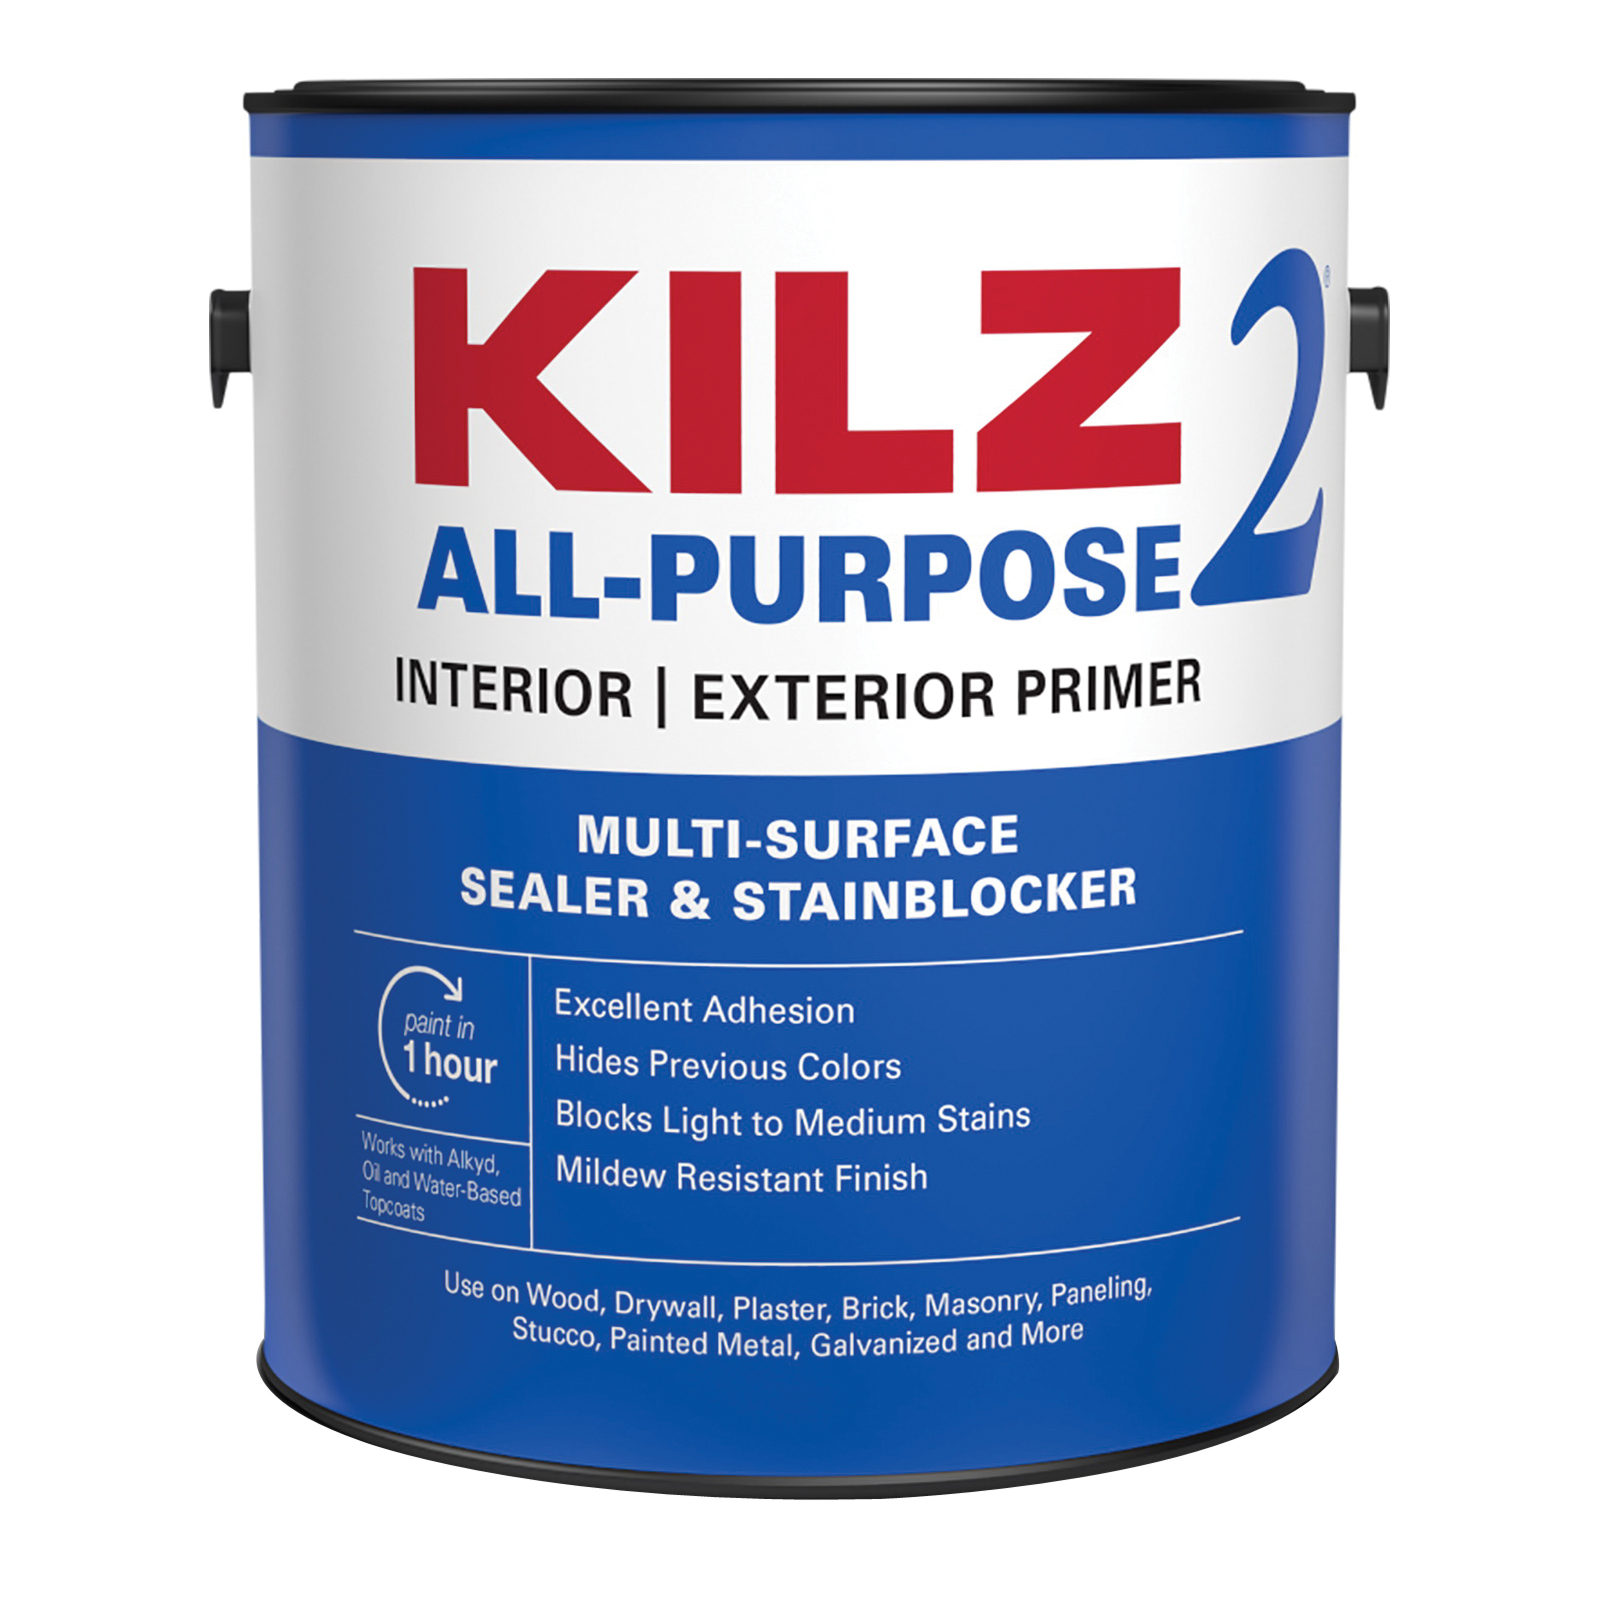 20041 Exterior Primer, White, 1 gal, Can